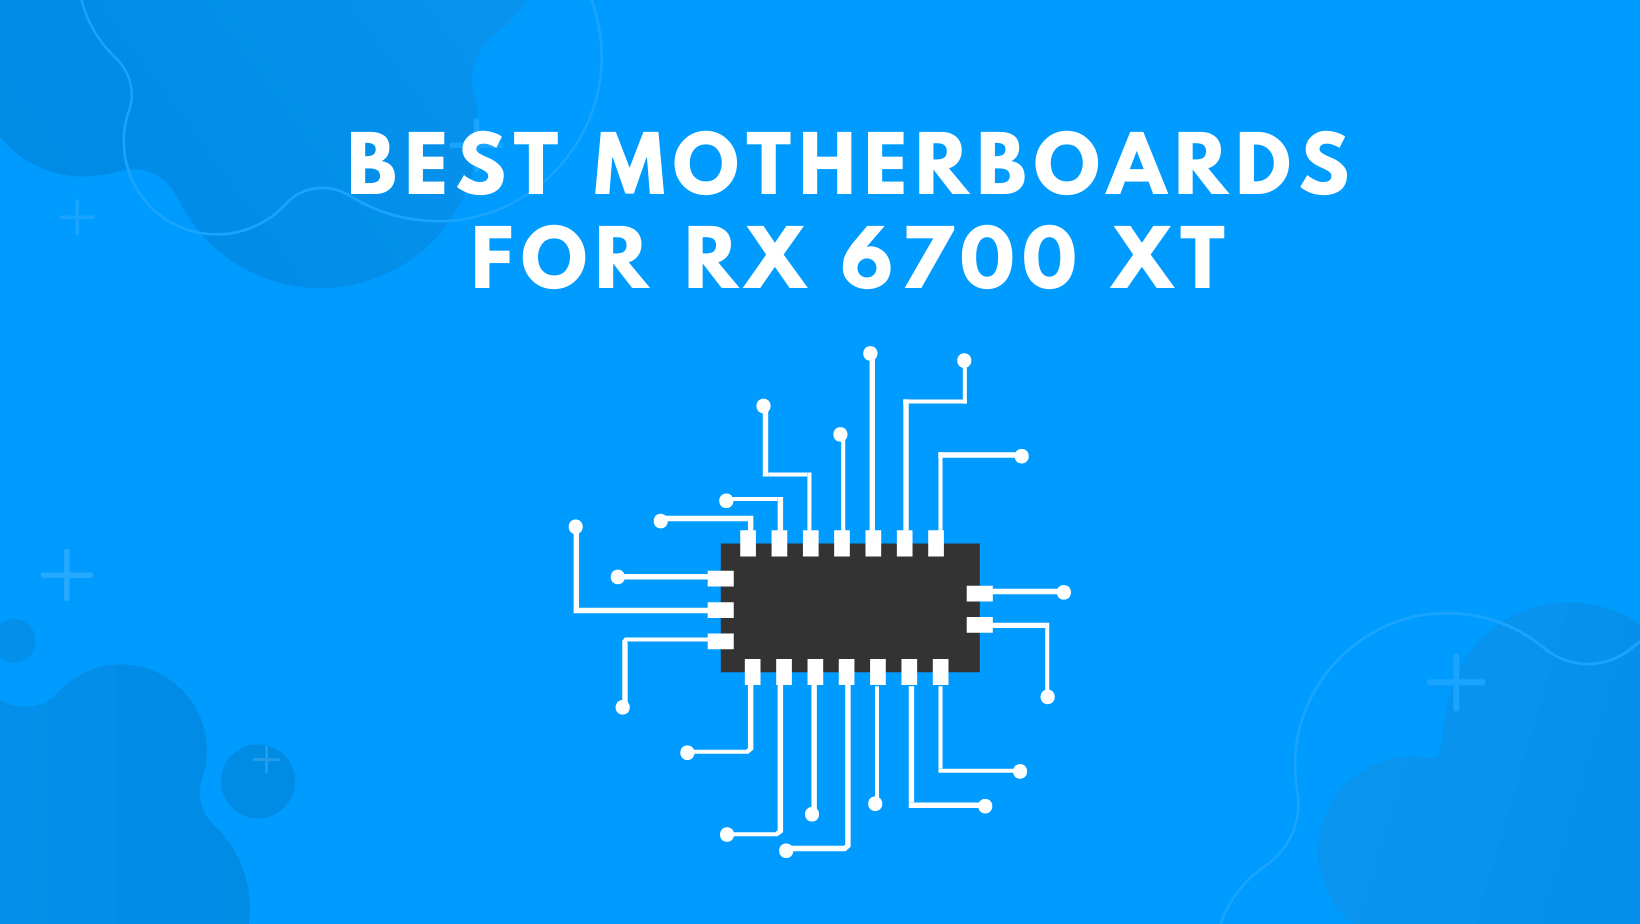 Best Motherboards for RX 6700 XT